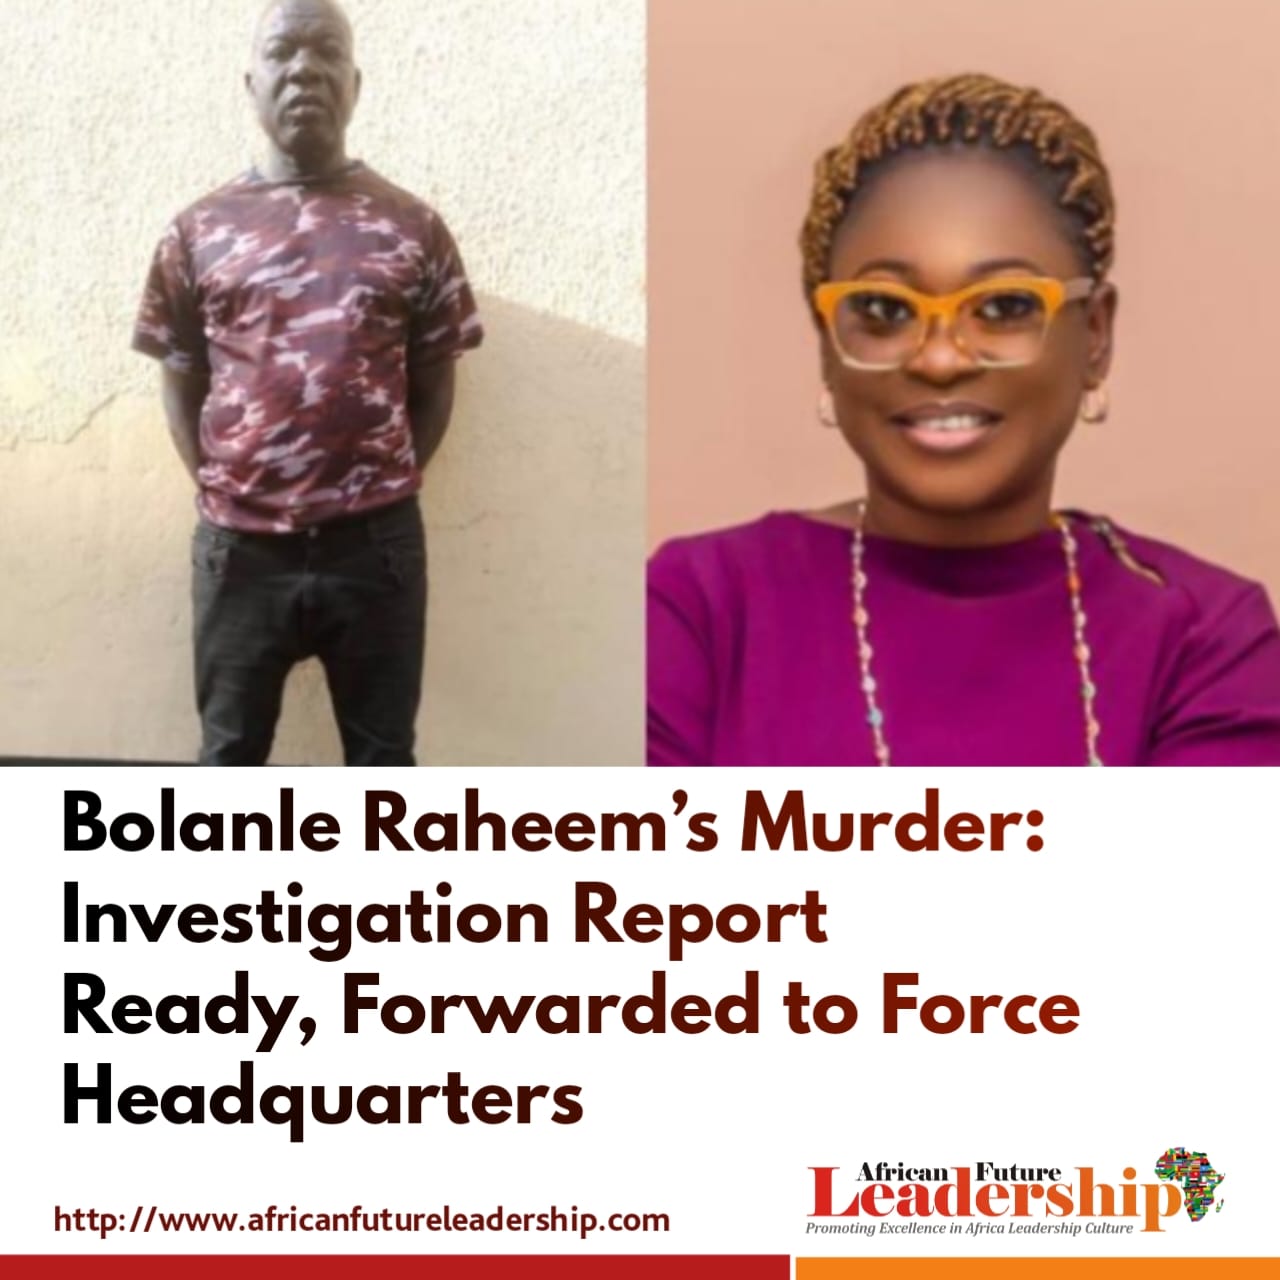 Bolanle Raheem’s Murder: Investigation Report Ready, Forwarded to Force Headquarters